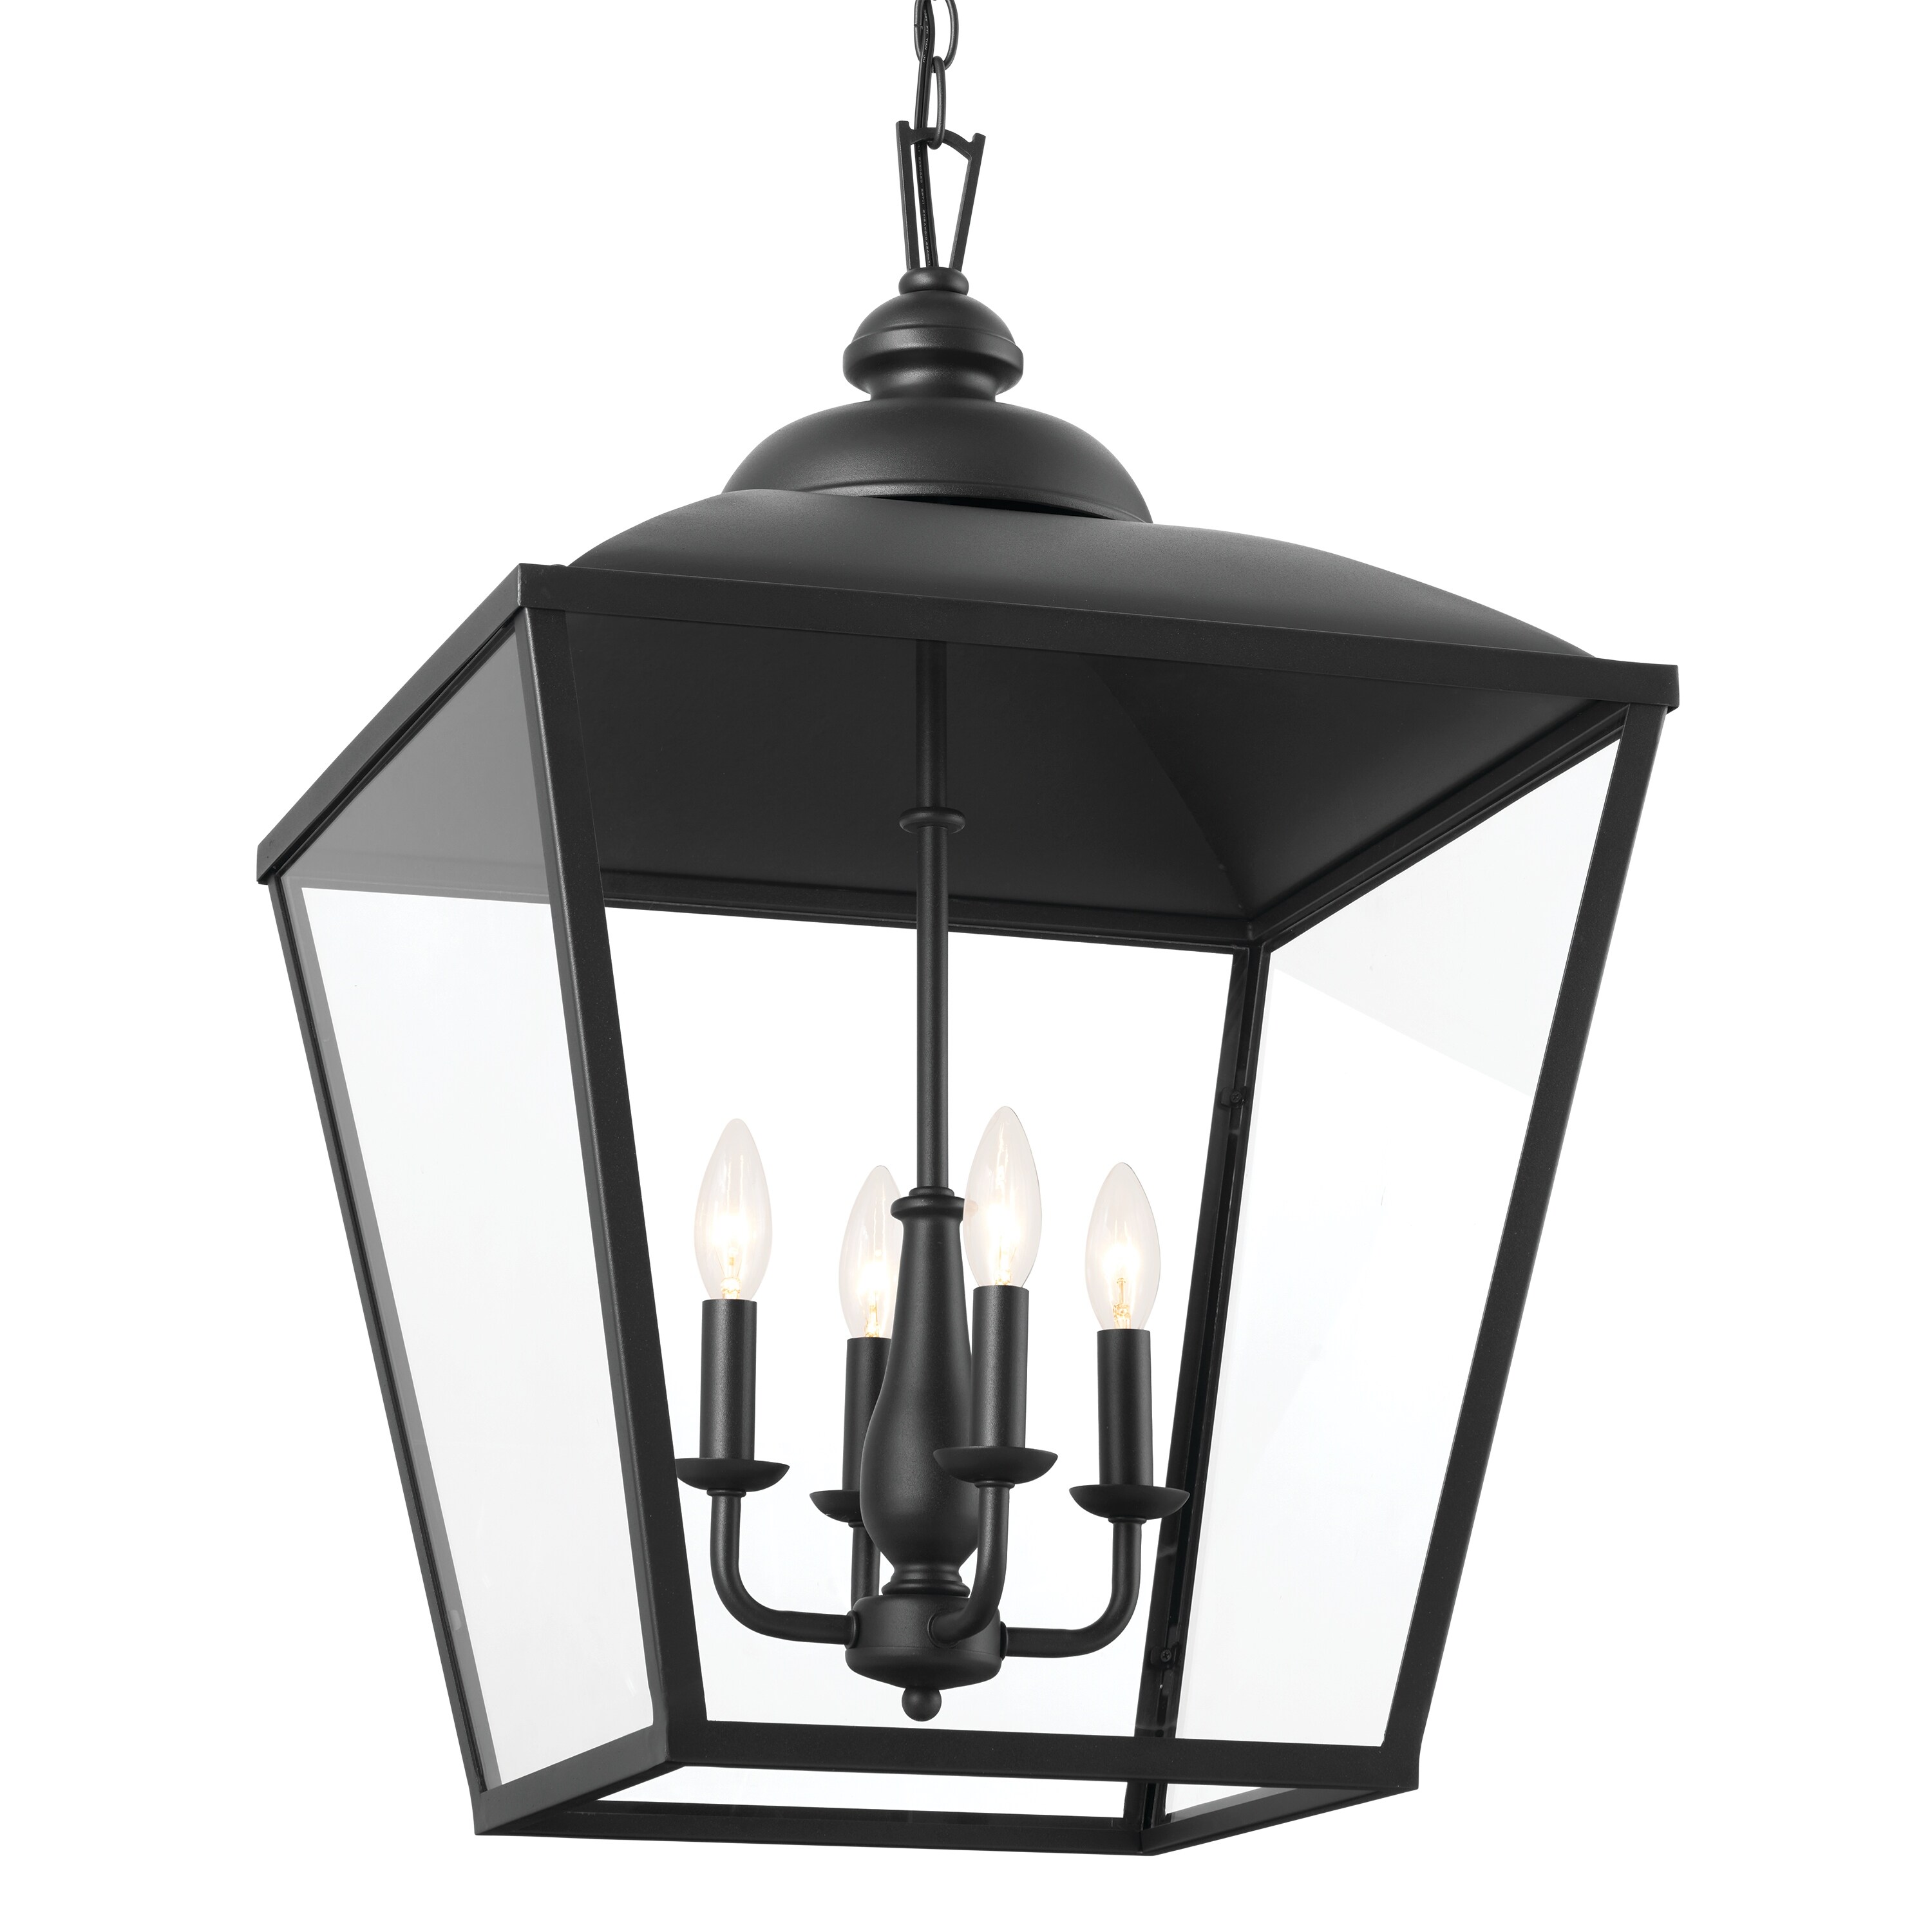 https://ak1.ostkcdn.com/images/products/is/images/direct/ba216796786e09d8cdf5eb91b6f21af0df3b5c33/Kichler-Lighting-Dame-27-inch-4-Light-Foyer-Pendant-Textured-Black-with-Clear-Glass.jpg